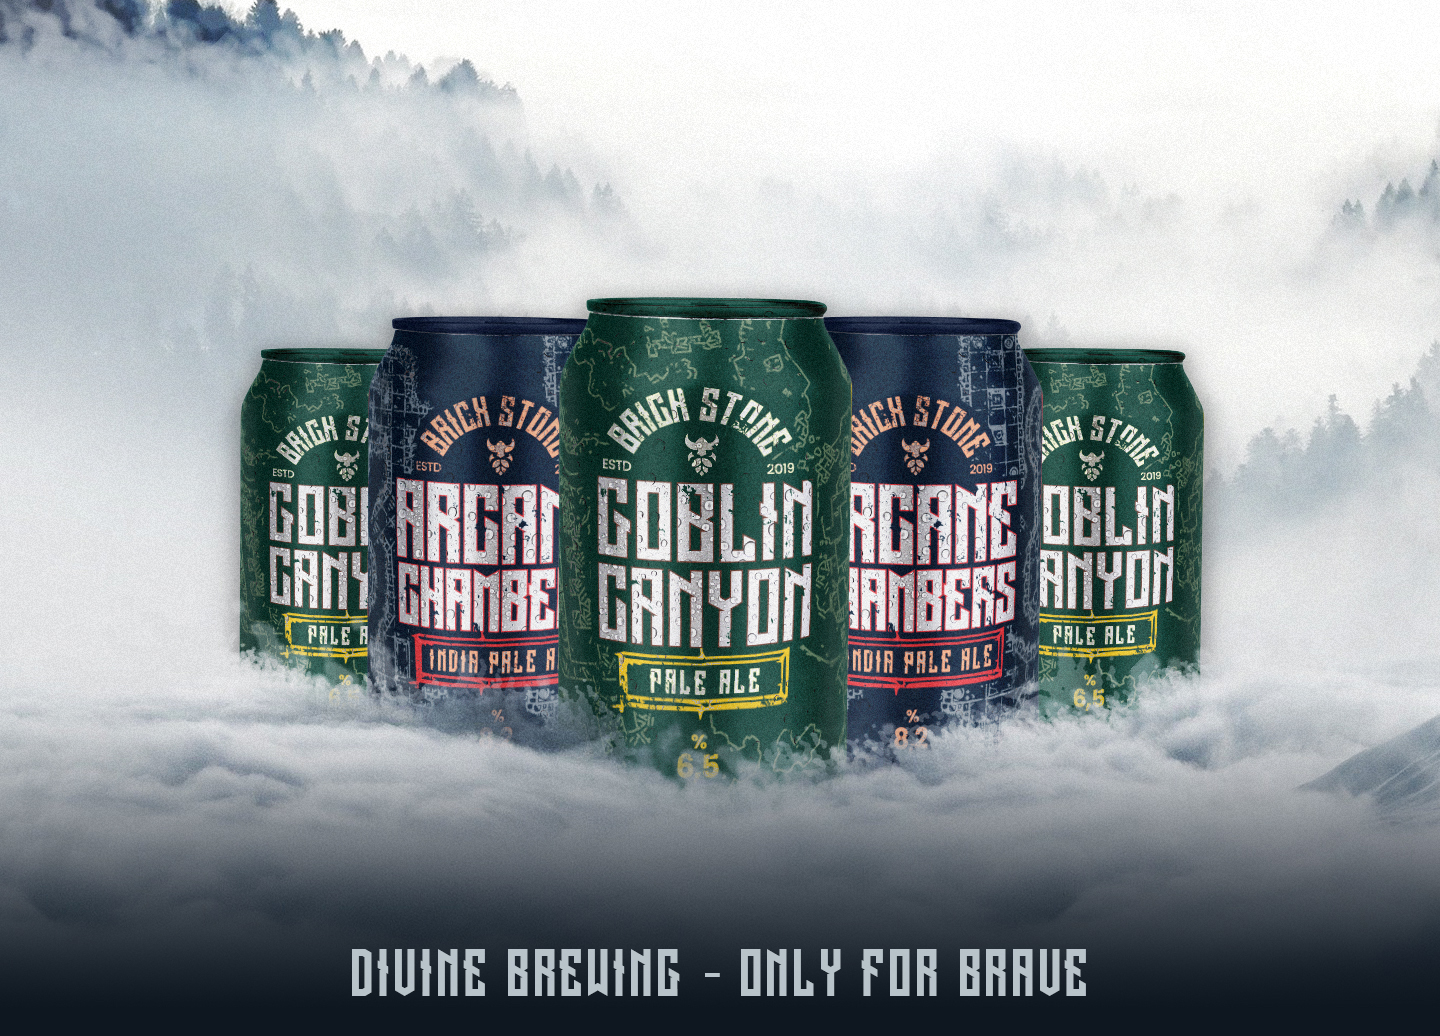 Brandman Design Creates Branding and Packaging Project for BrickStone Brewing